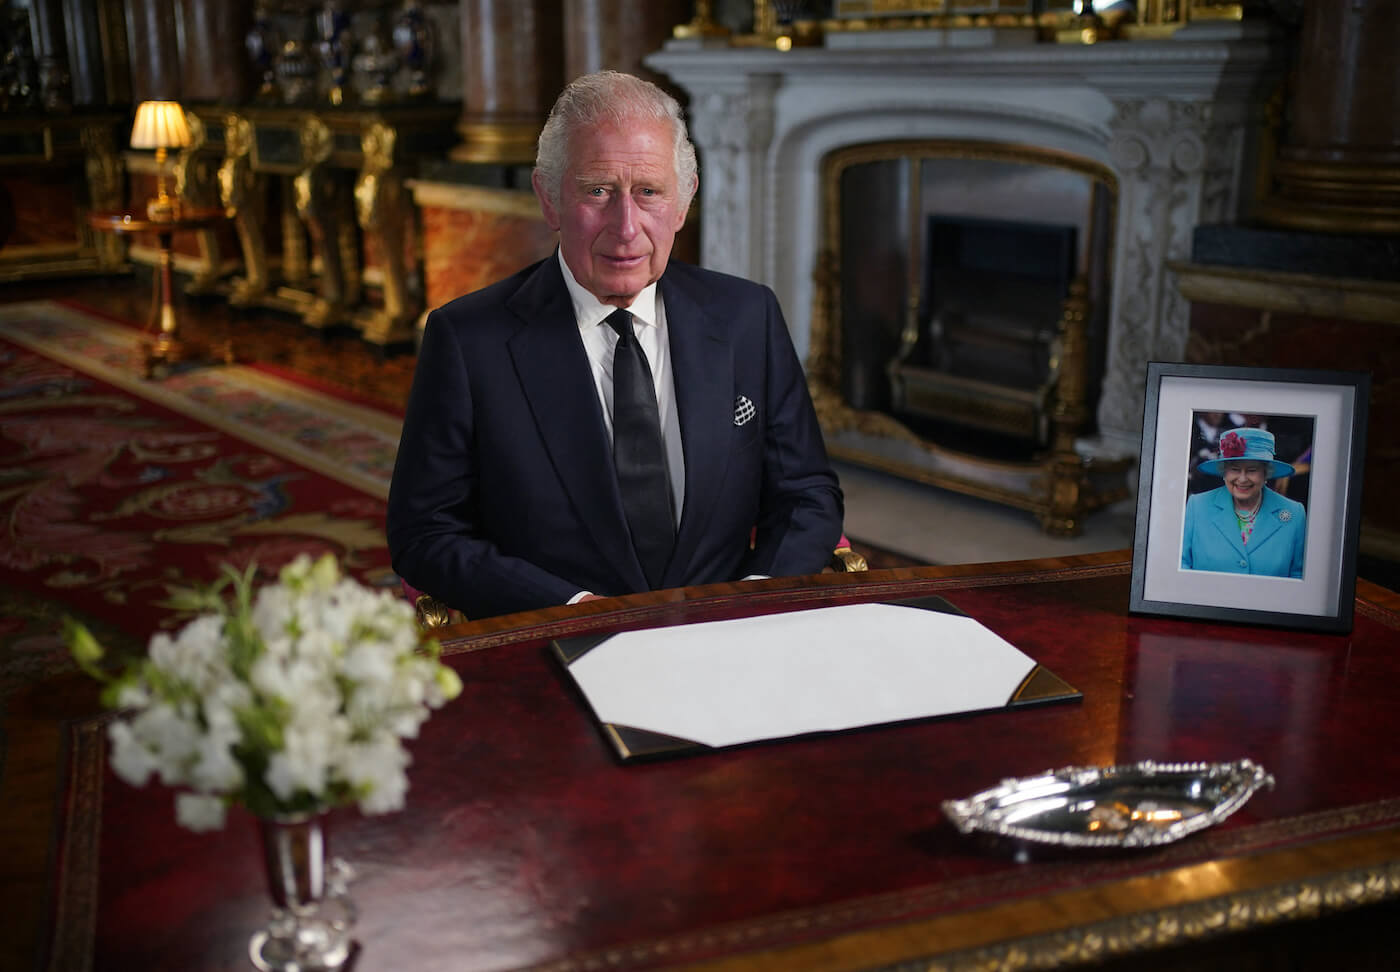 King Charles III sitting at a desk in a suit